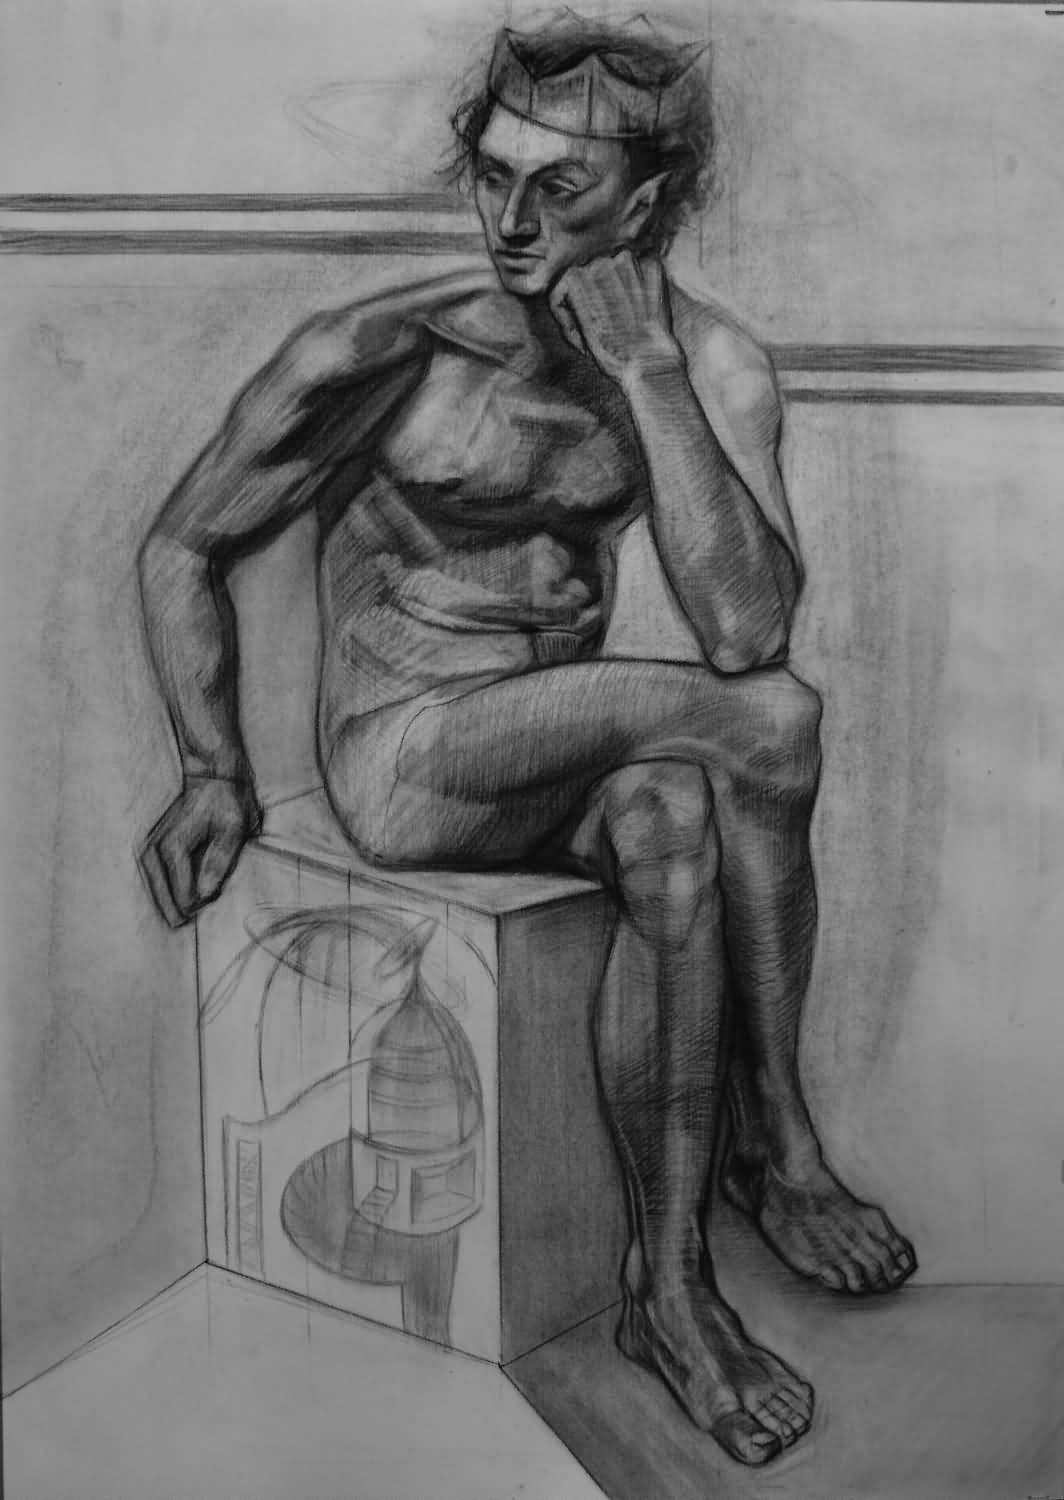 The architector. Charcoal on paper. 60x80 cm. 2018